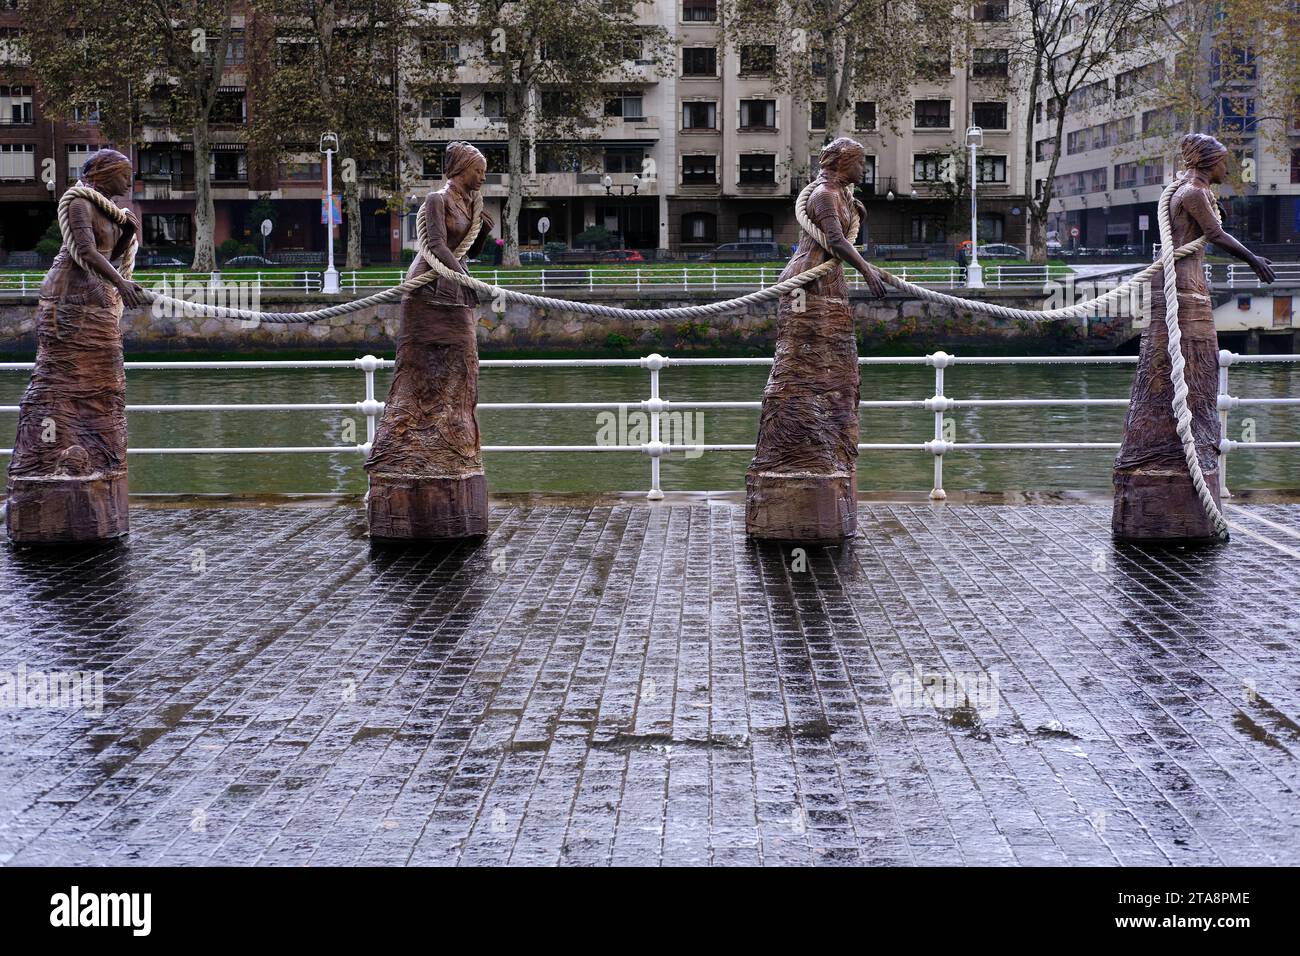 The sirgueras of Bilbao, a sculpture dedicated to women boat tugs located next to the Nervión River as it passes through the city of Bilbao. Stock Photo